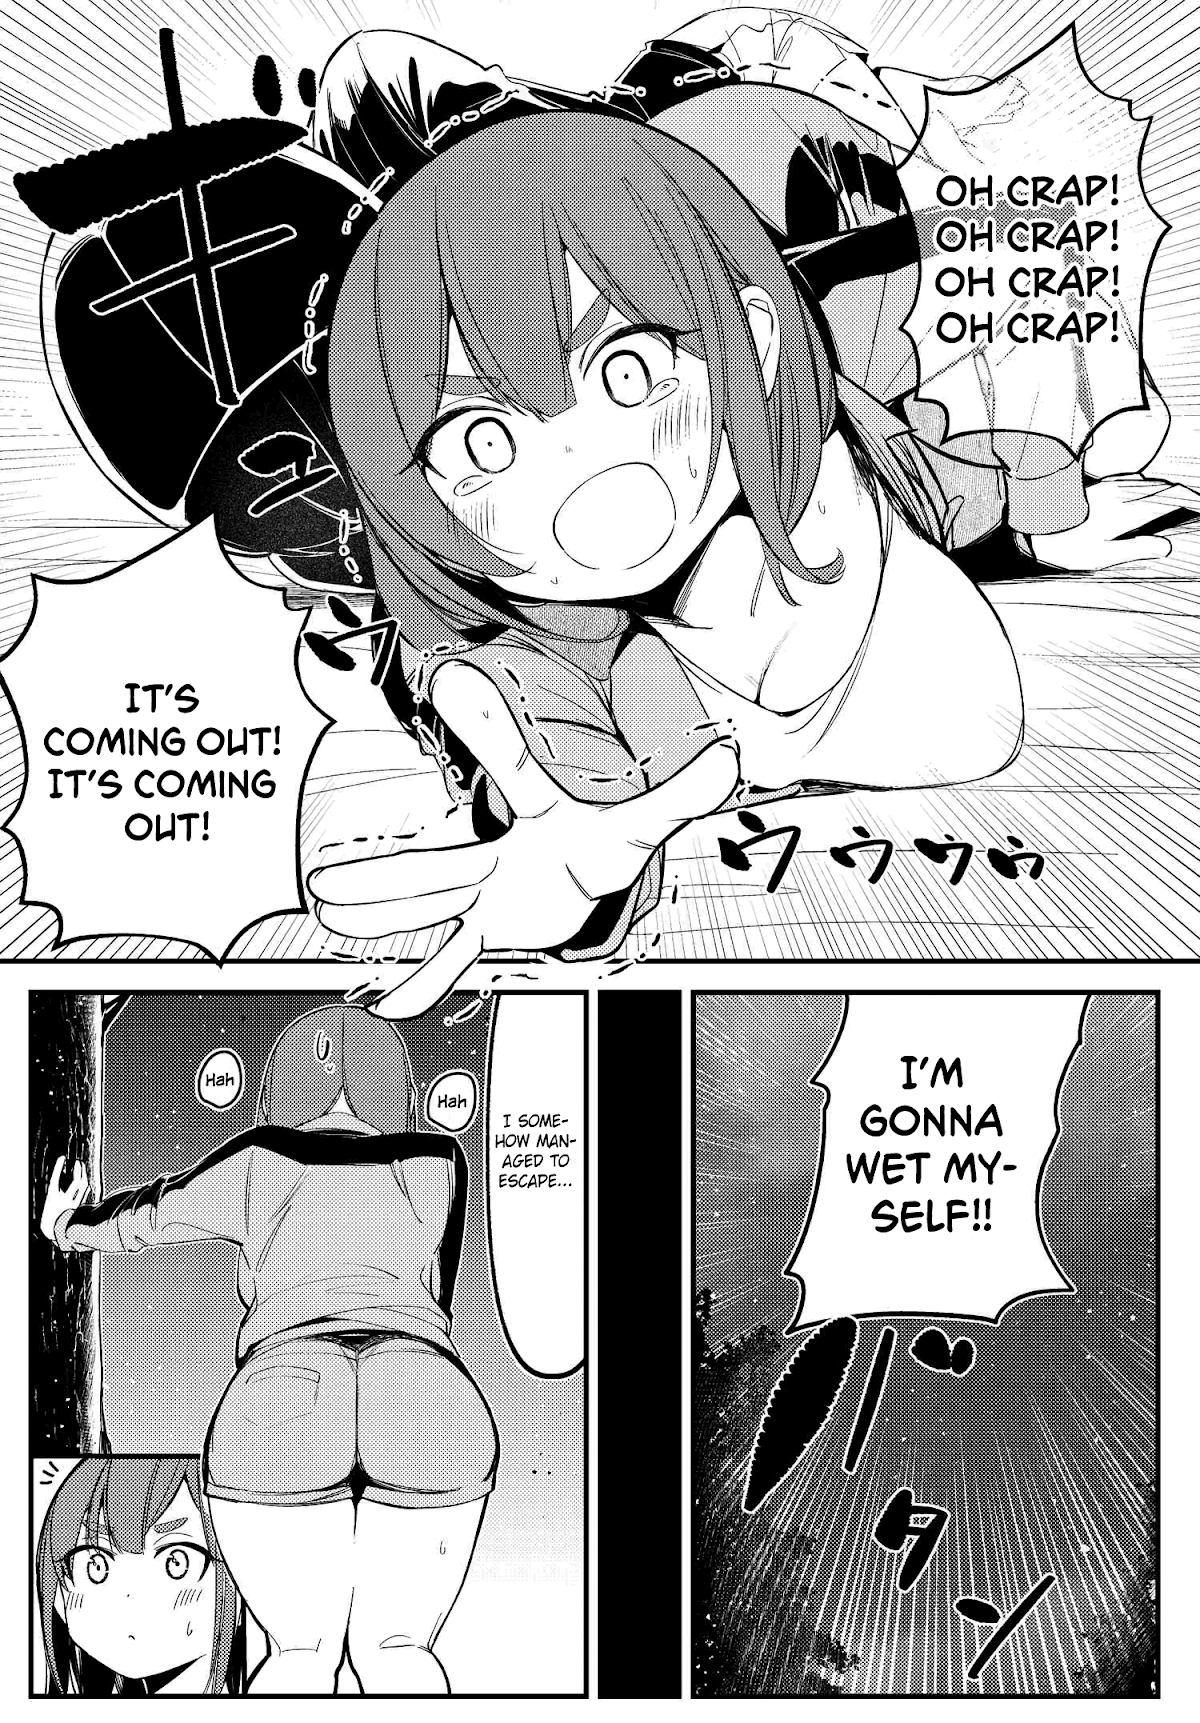 Take Responsibility For My Stomach! - Page 4